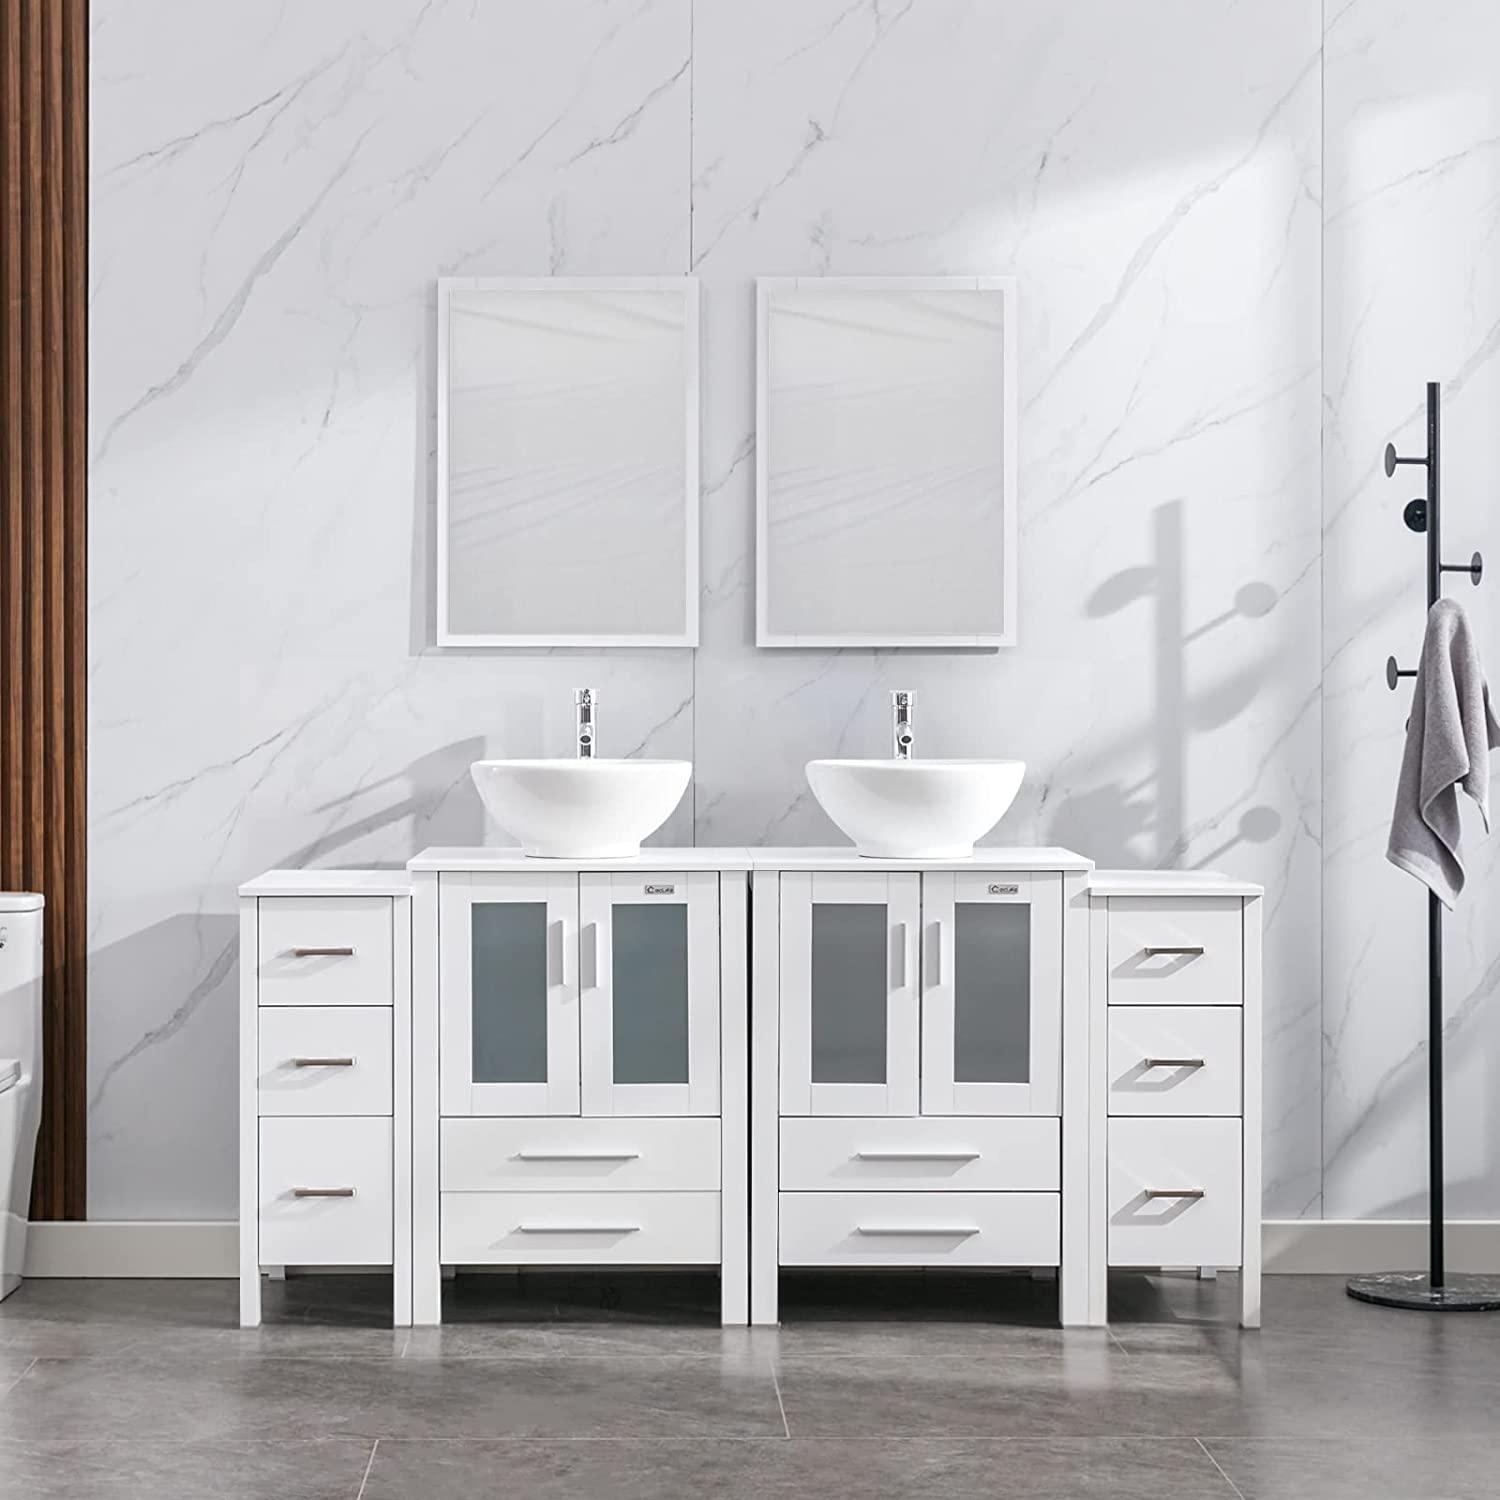 72” Bathroom Vanity Sink Combo W/White Small Side Cabinet Round Tempered Glass Vessel Sink & 1.5 GPM Water Save Faucet & Solid Brass Pop Up Drain, with Mirror